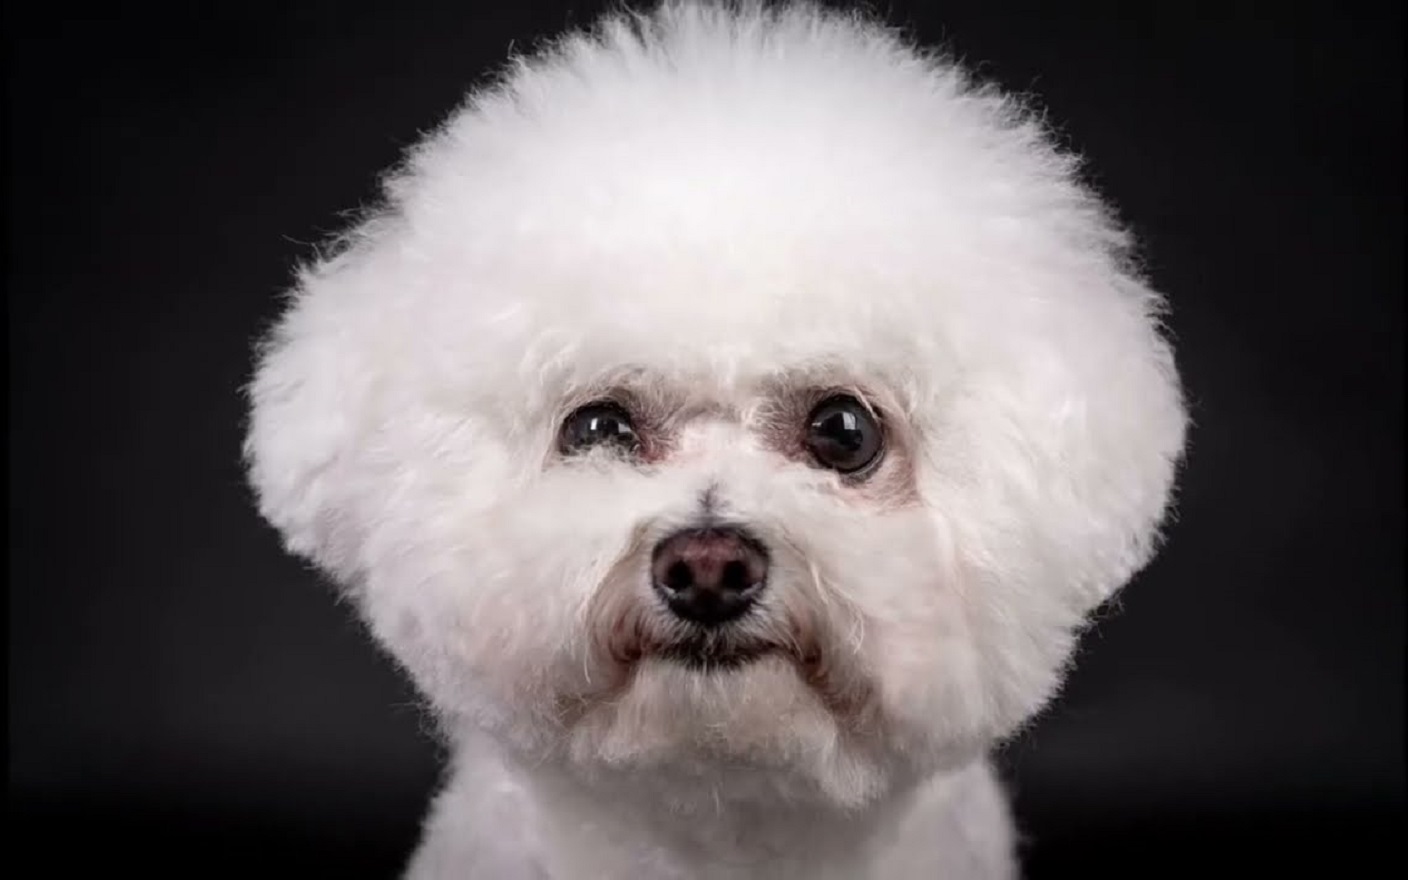 Lovely Bichon Frise - Find Out How to Care for Bichons Frises